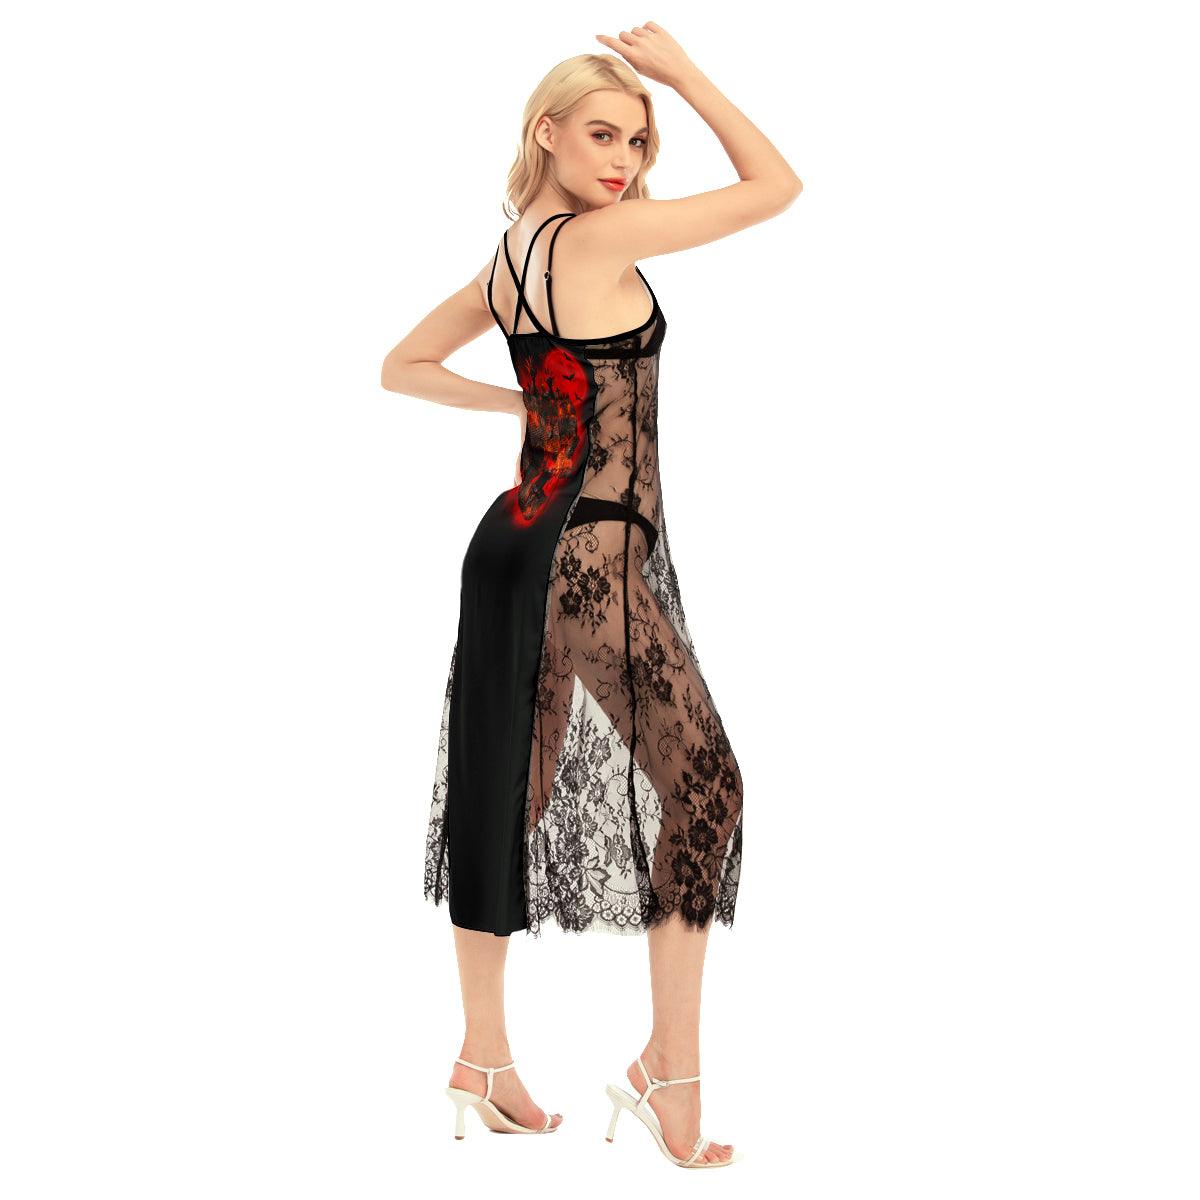 Bloody Head Skull All-Over Print Women Lace Cami Cross Back Dress, Sexy Nightgown - Wonder Skull